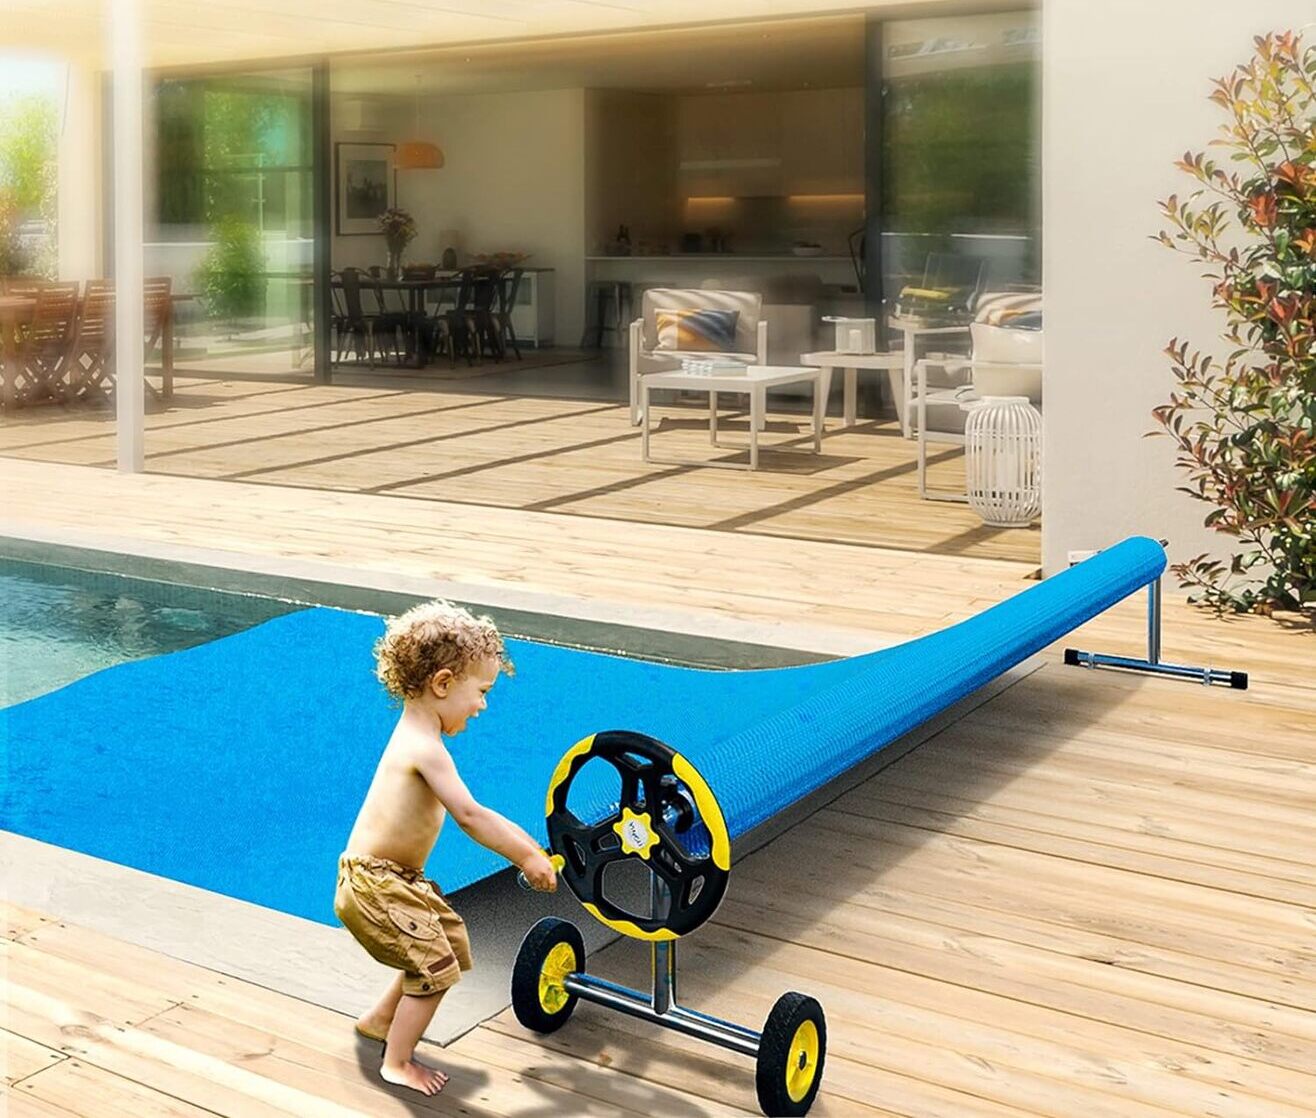 Best-Solar-Cover-Reel-for-Inground-Pool-Review-&-Buying-Guide-TN